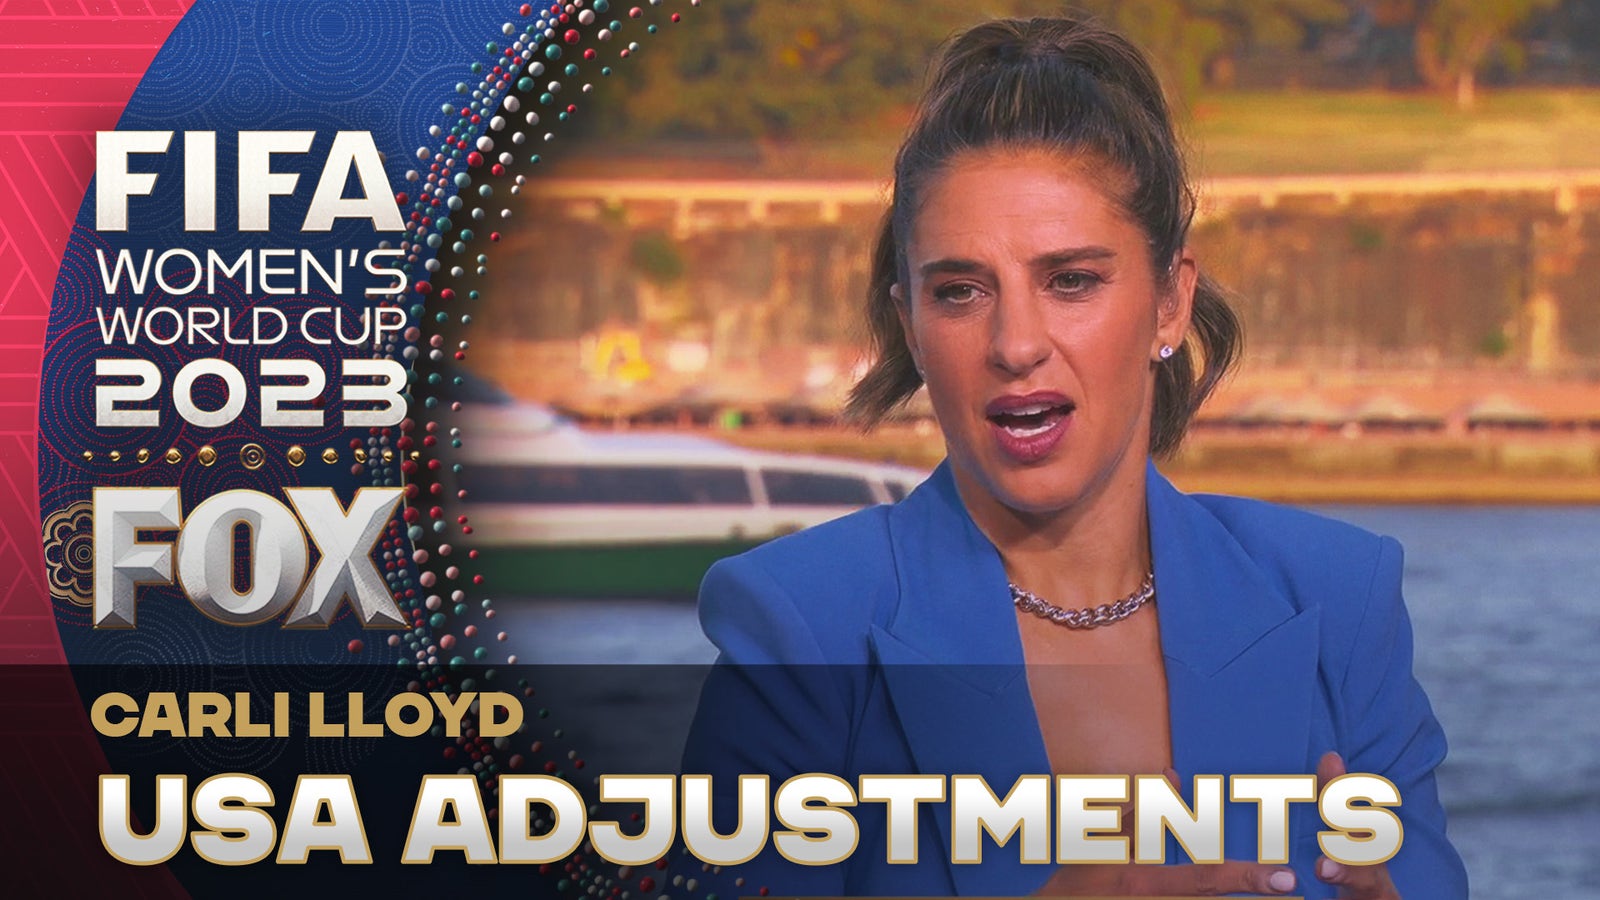 "I think this calls for a formation change" — Carli Lloyd on Sweden match